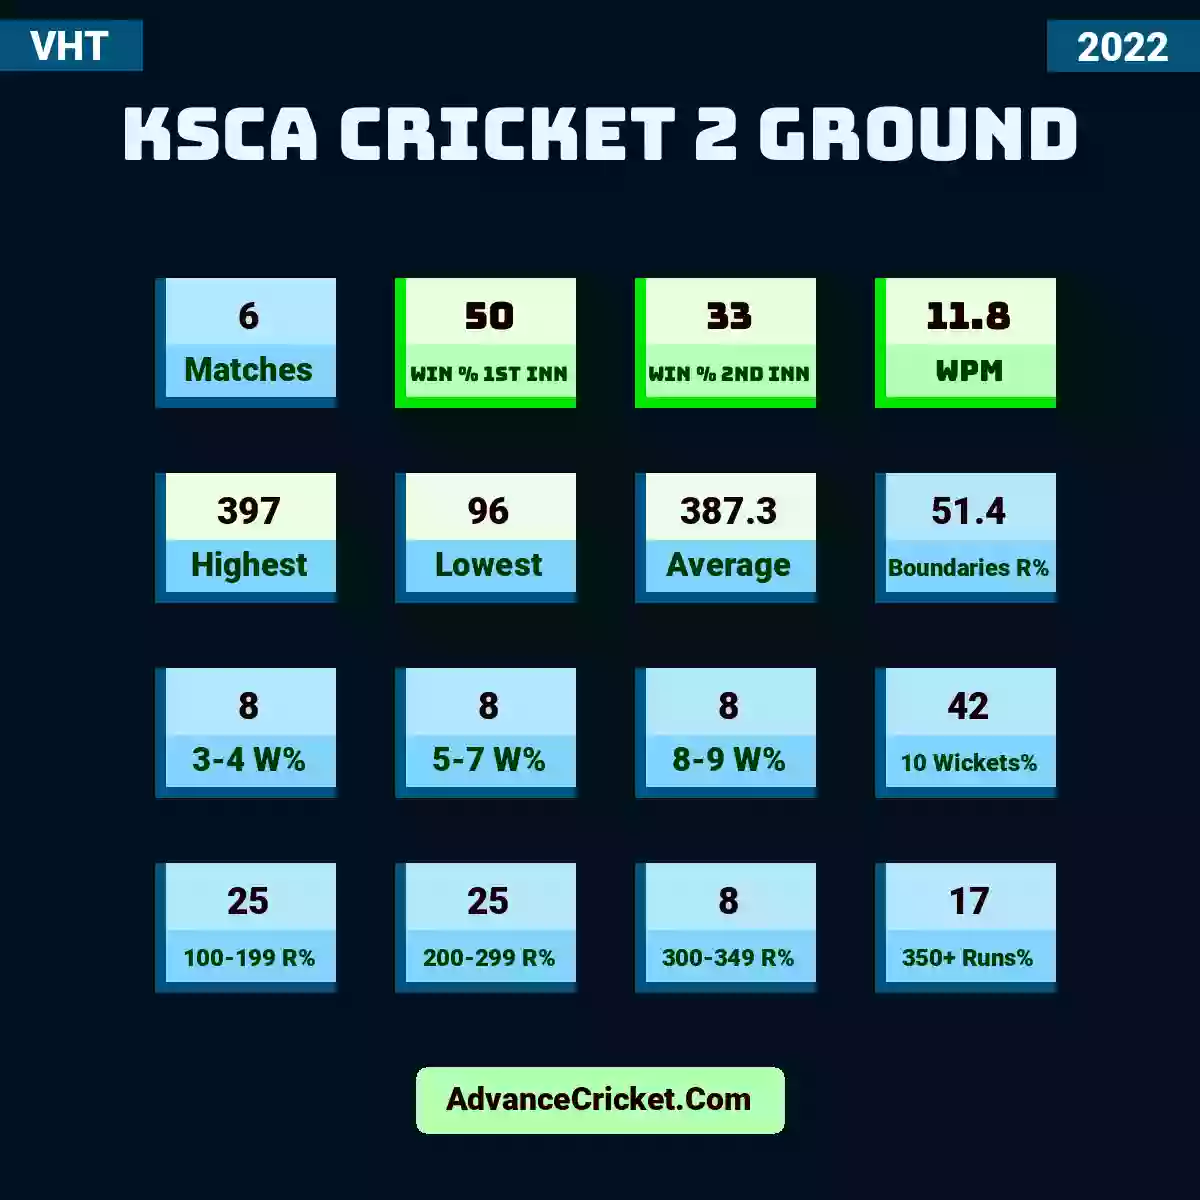 Image showing KSCA Cricket 2 Ground with Matches: 6, Win % 1st Inn: 50, Win % 2nd Inn: 33, WPM: 11.8, Highest: 397, Lowest: 96, Average: 387.3, Boundaries R%: 51.4, 3-4 W%: 8, 5-7 W%: 8, 8-9 W%: 8, 10 Wickets%: 42, 100-199 R%: 25, 200-299 R%: 25, 300-349 R%: 8, 350+ Runs%: 17.